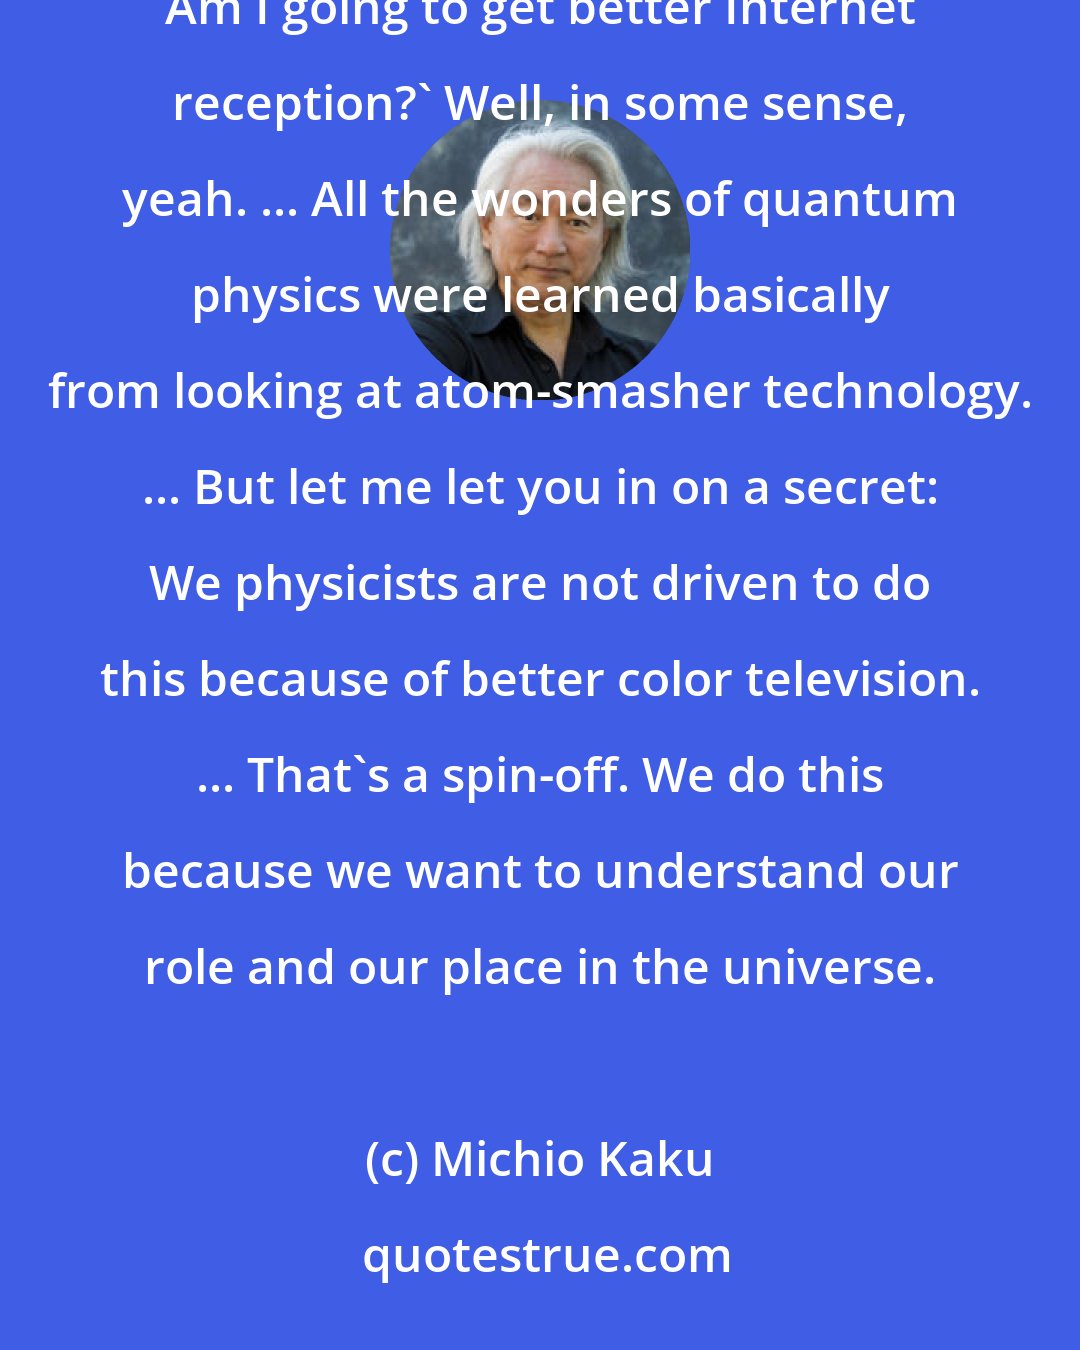 Michio Kaku: Sometimes the public says, 'What's in it for Numero Uno? Am I going to get better television reception? Am I going to get better Internet reception?' Well, in some sense, yeah. ... All the wonders of quantum physics were learned basically from looking at atom-smasher technology. ... But let me let you in on a secret: We physicists are not driven to do this because of better color television. ... That's a spin-off. We do this because we want to understand our role and our place in the universe.